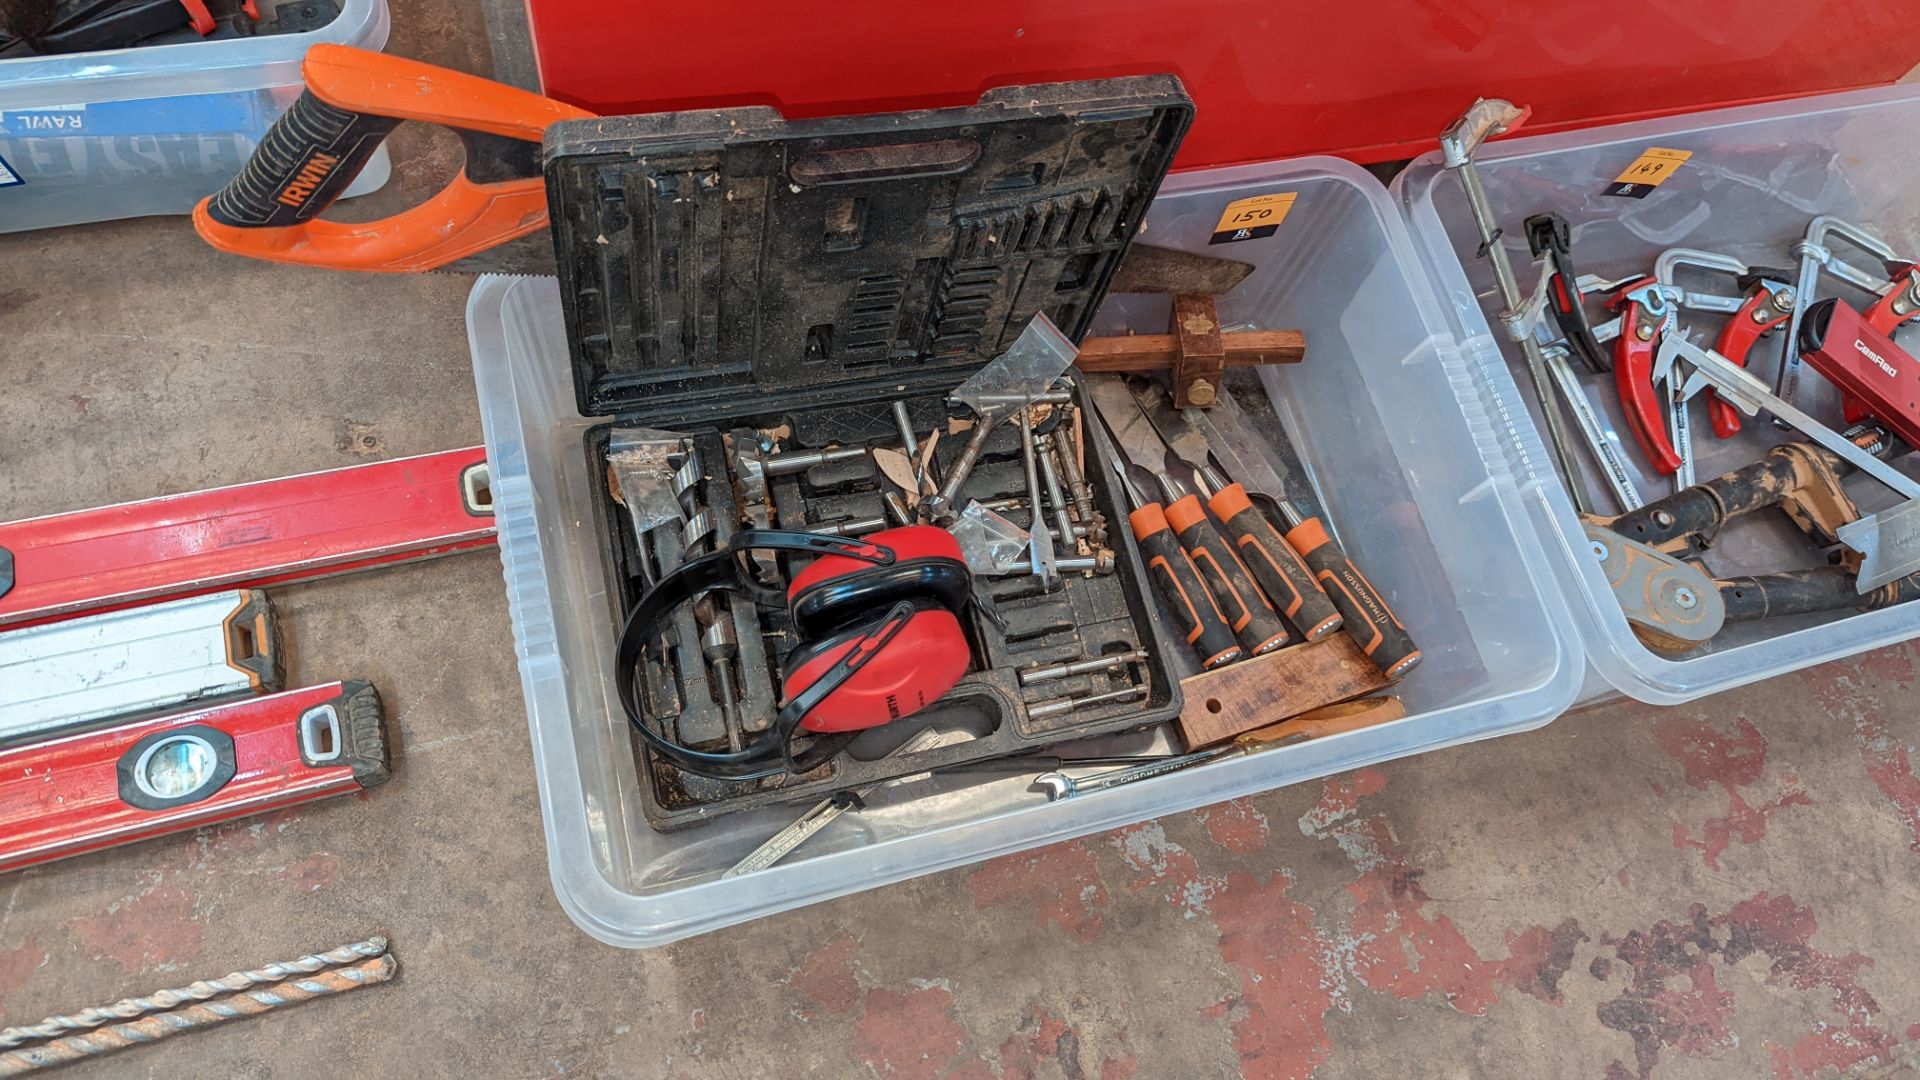 Contents of a crate of hand tools & miscellaneous - crate excluded - Image 3 of 7